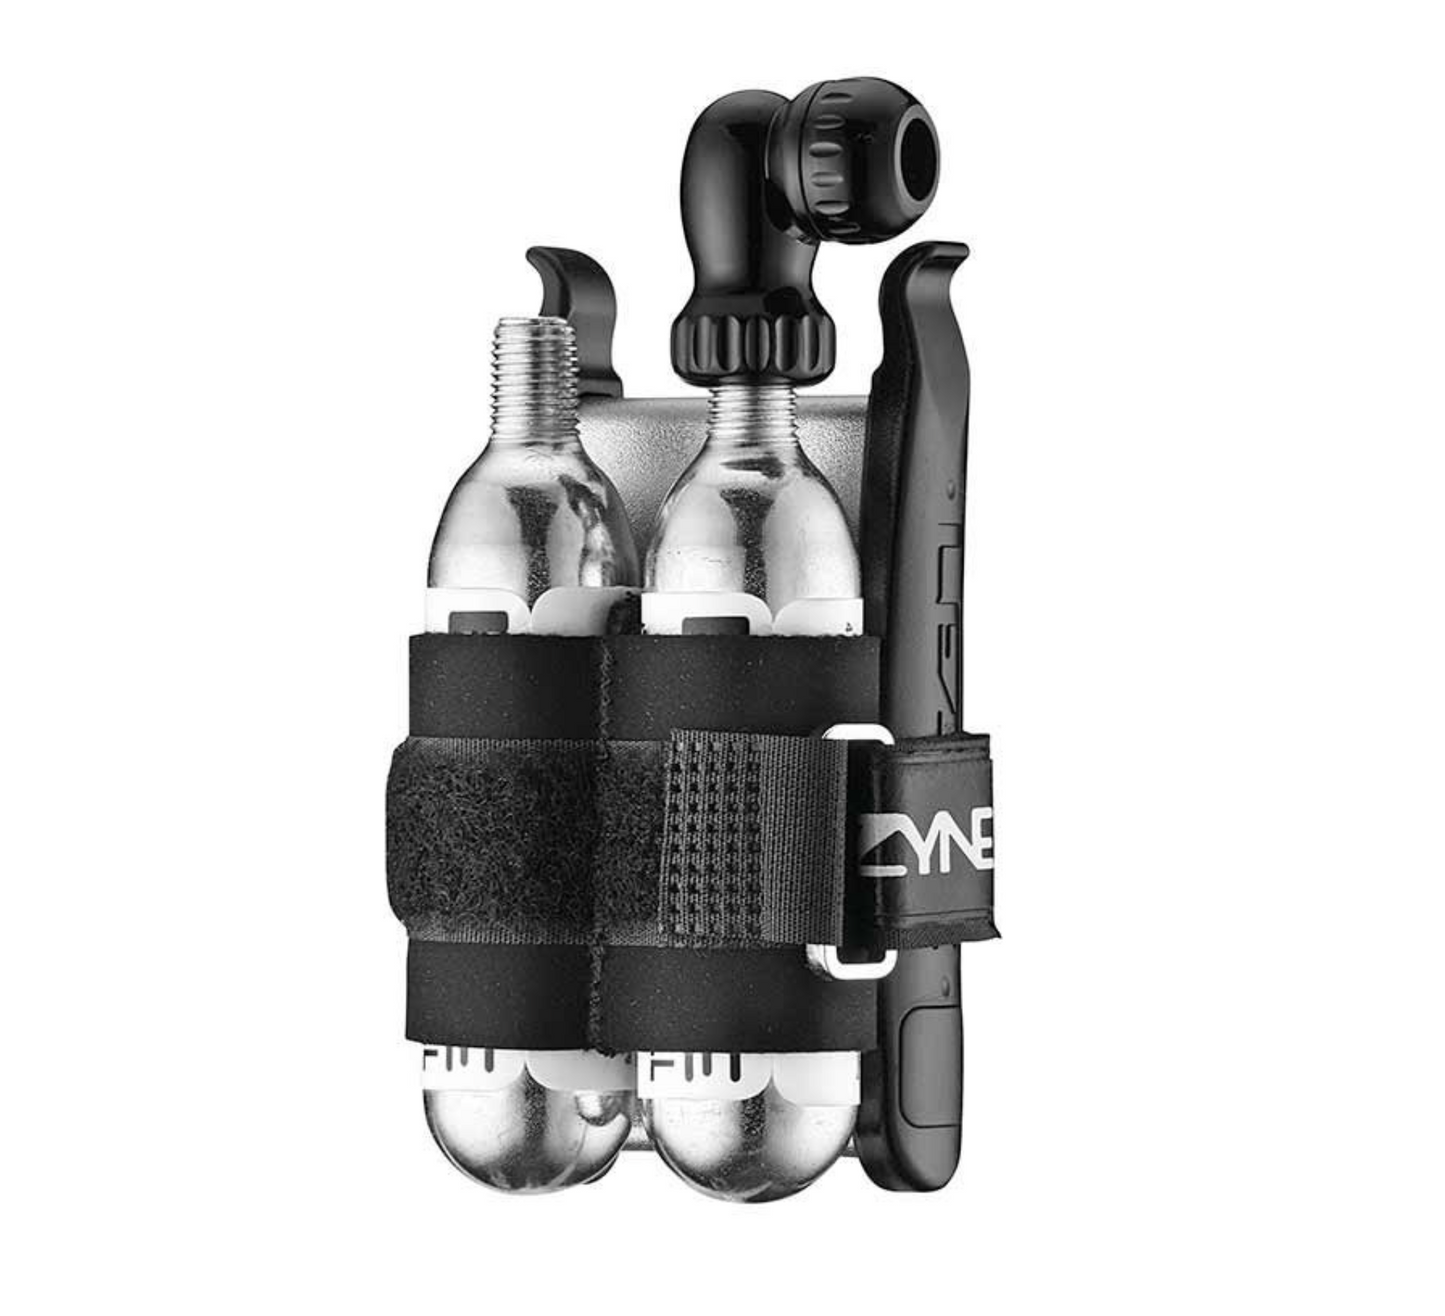 Lezyne, Co2 Twin Kit, Co2 inflator and tire levers kit, 2x16g